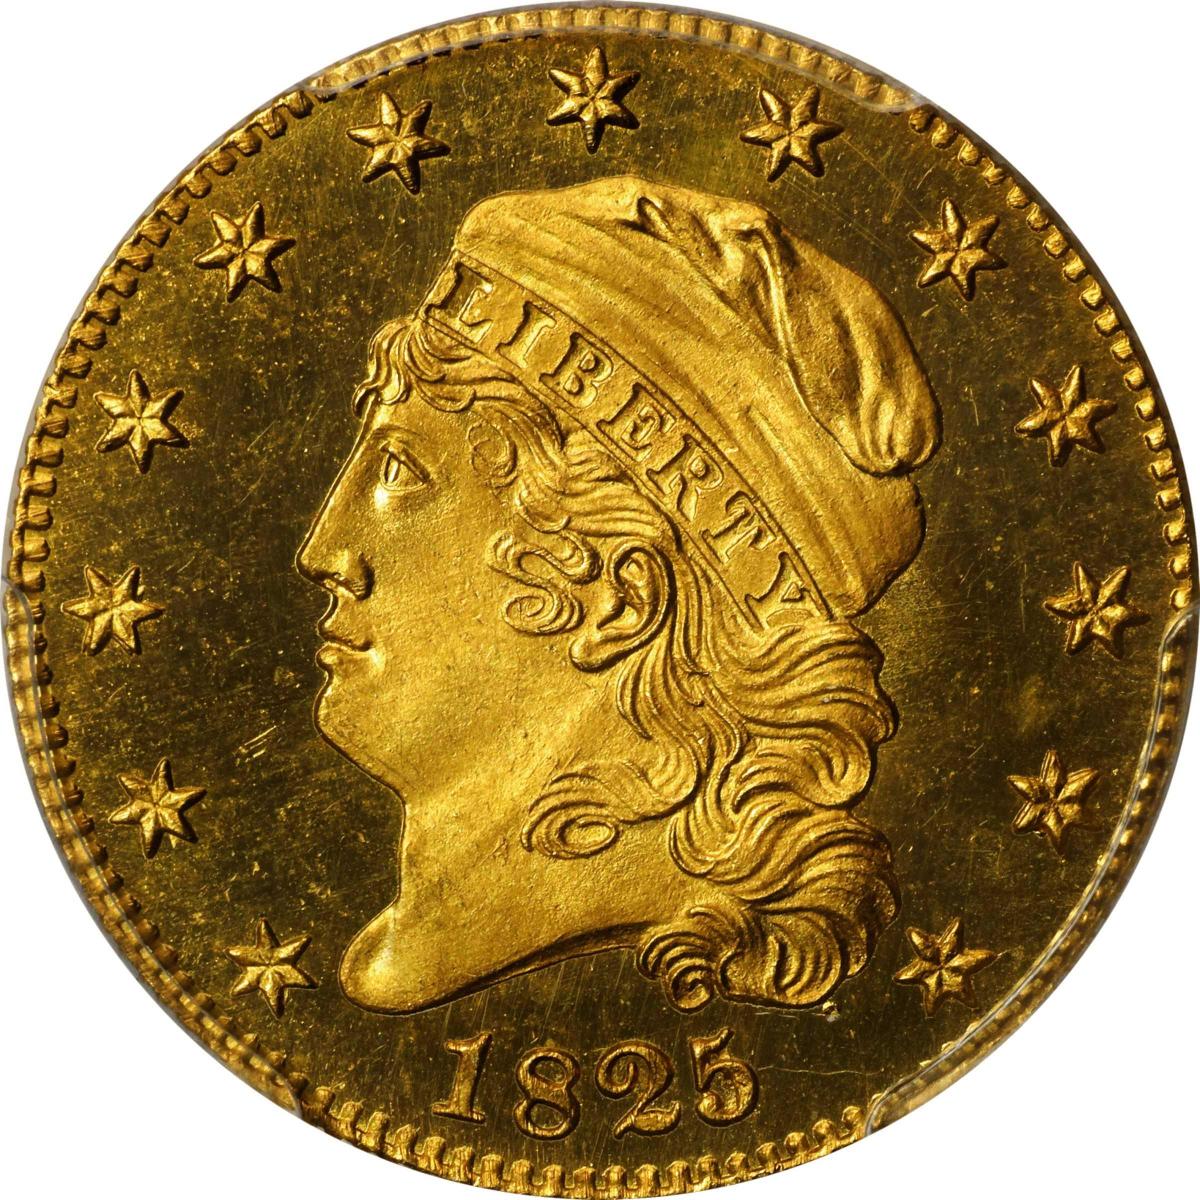 The finest of three known proof 1825/4/1 half eagles from the Mocatta Collection of U.S. Gold Rarities will highlight Stack’s Bowers Galleries’ Summer 2022 Global Showcase Auction set for Aug. 22-26. (Image courtesy Stack’s Bowers Galleries.)